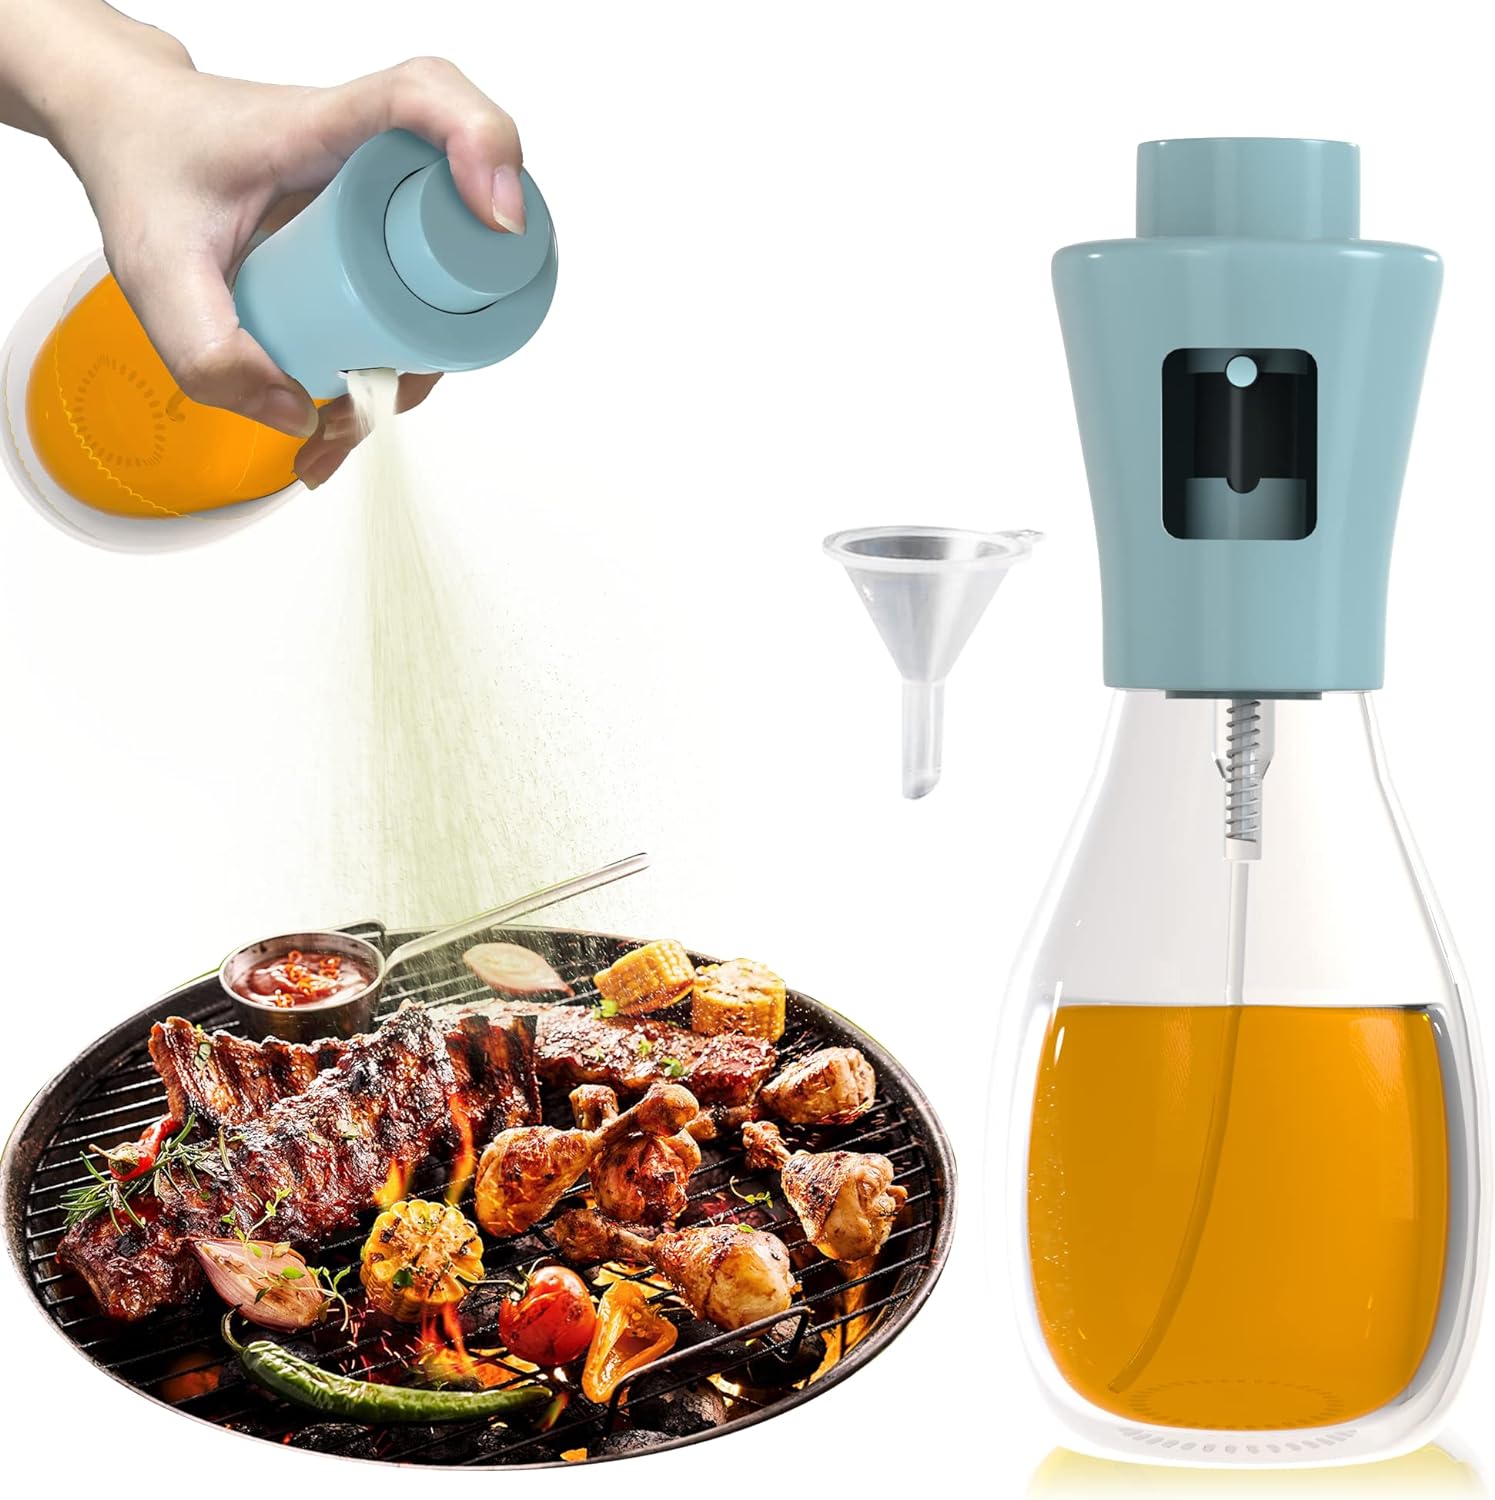 Olive Oil Sprayer for Cooking - 200ml Glass Mister for Salad Making and Grilling